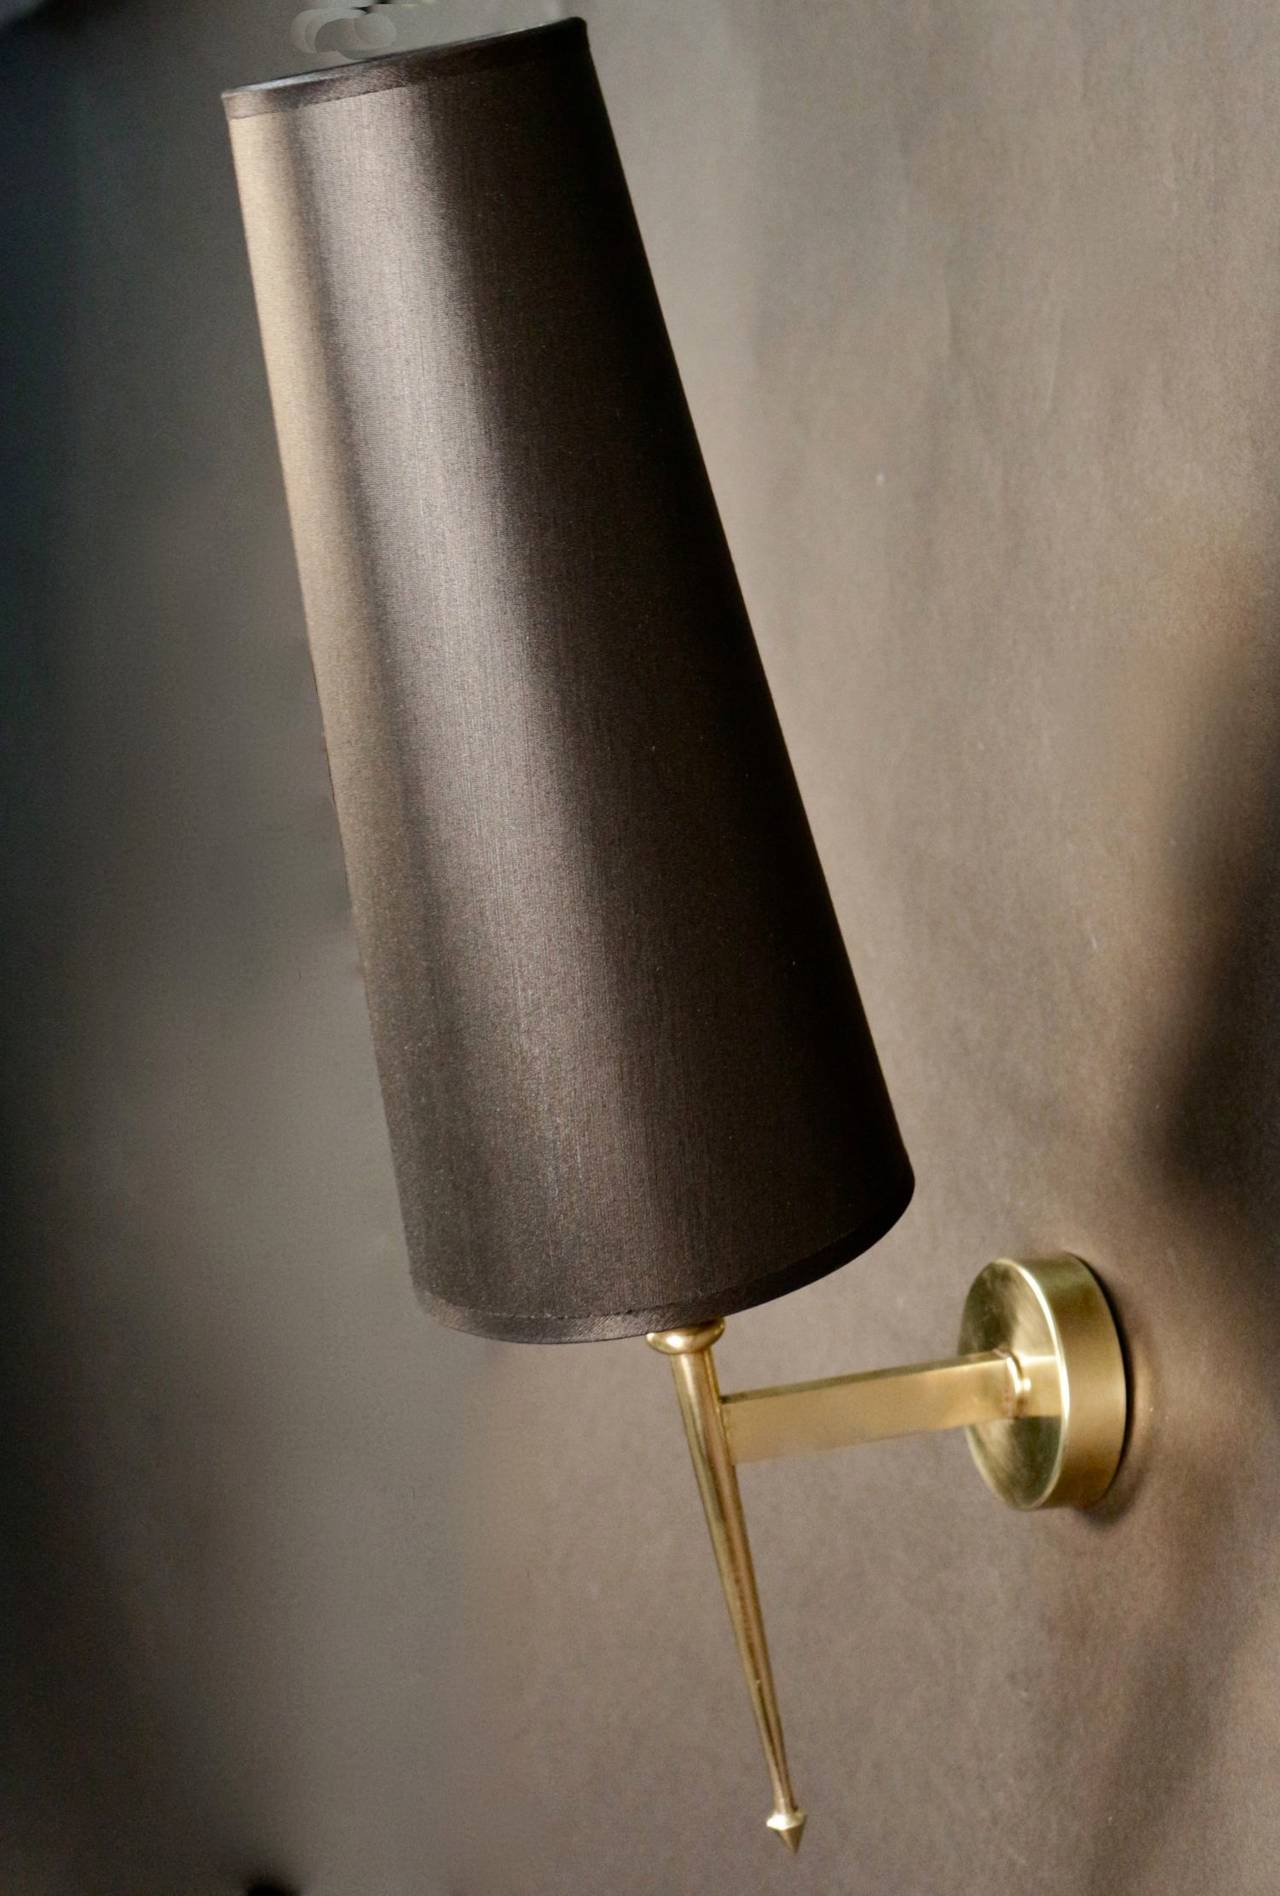 Pair of 1950s sconces by Maison Lunel. Brass rod with a pike end enhanced by a metal grey cup and topped with a tailored lampshade with gold inside and black outside. One lighted arm per sconce.